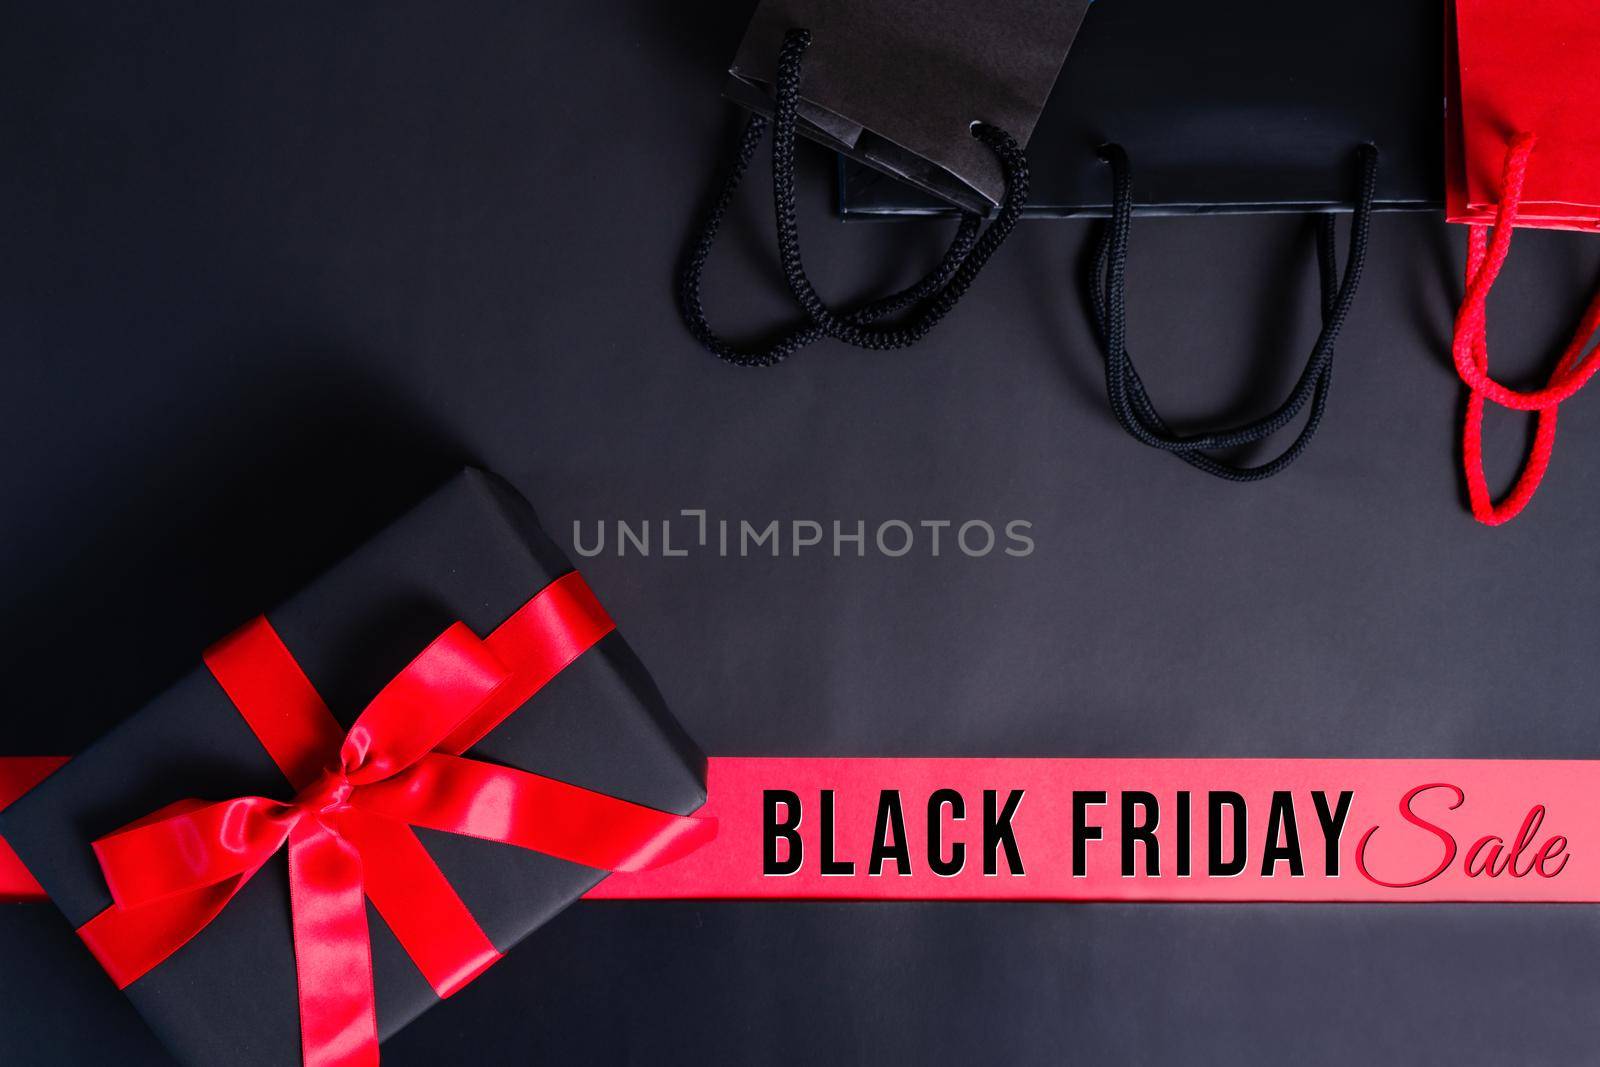 Black Friday sale, black gift box and shopping bag for online shopping